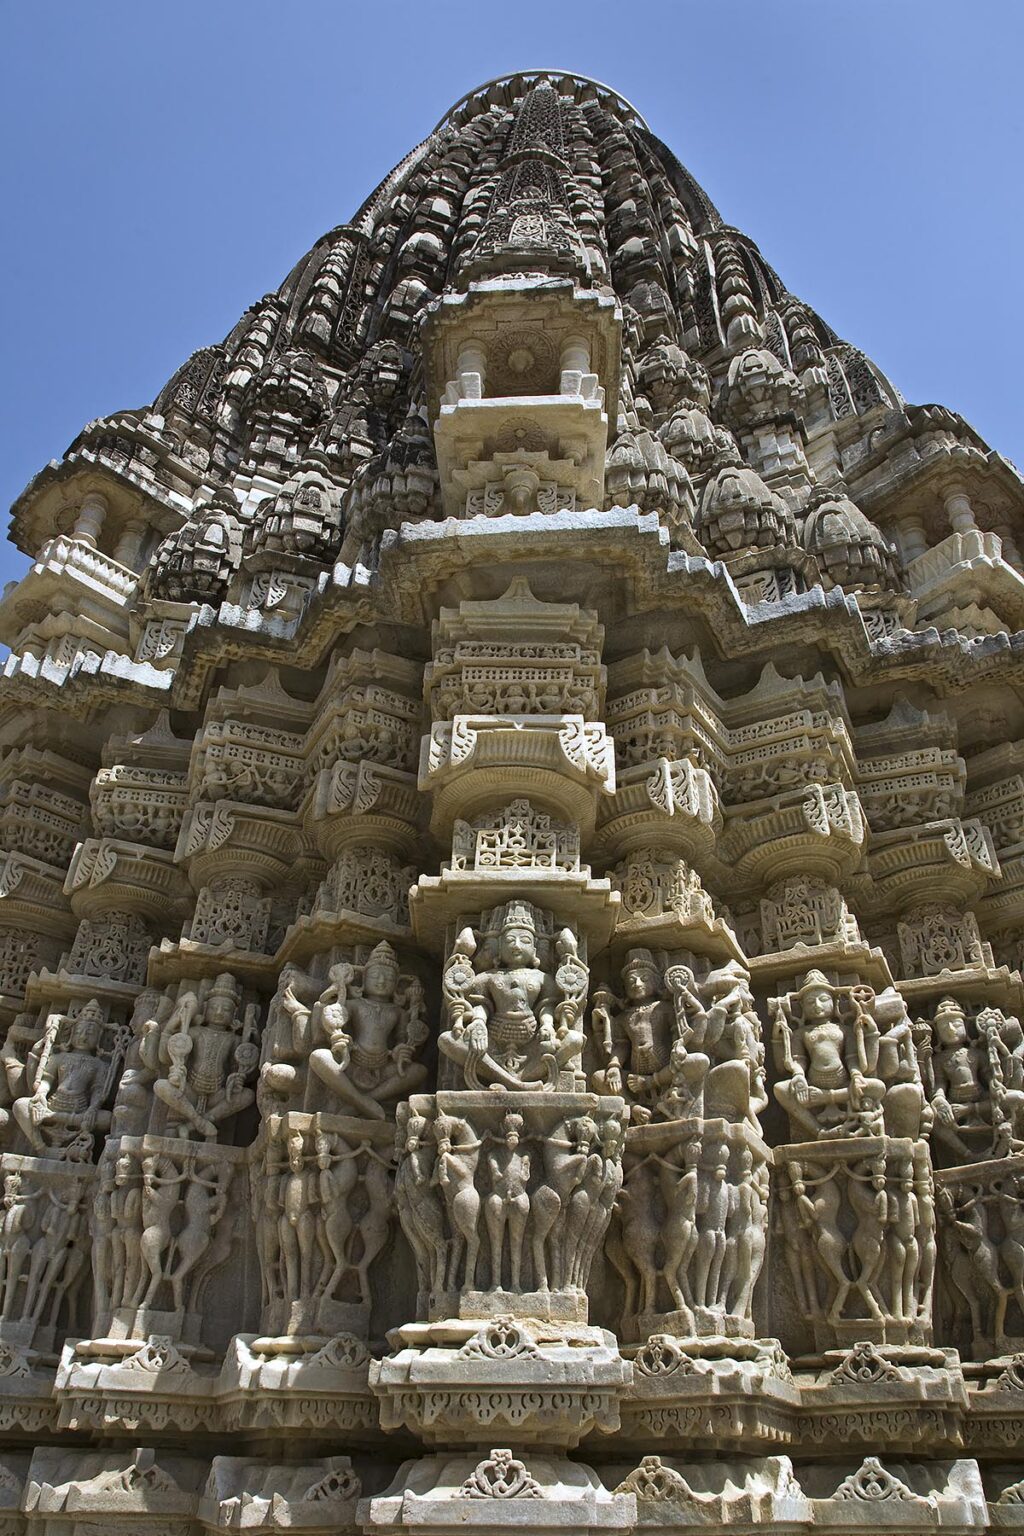 The AMBA MATA JAIN TEMPLE at RANAKPUR is carved out of white marble in the Pali District of RAJASTHAN near Sadri - INDIA